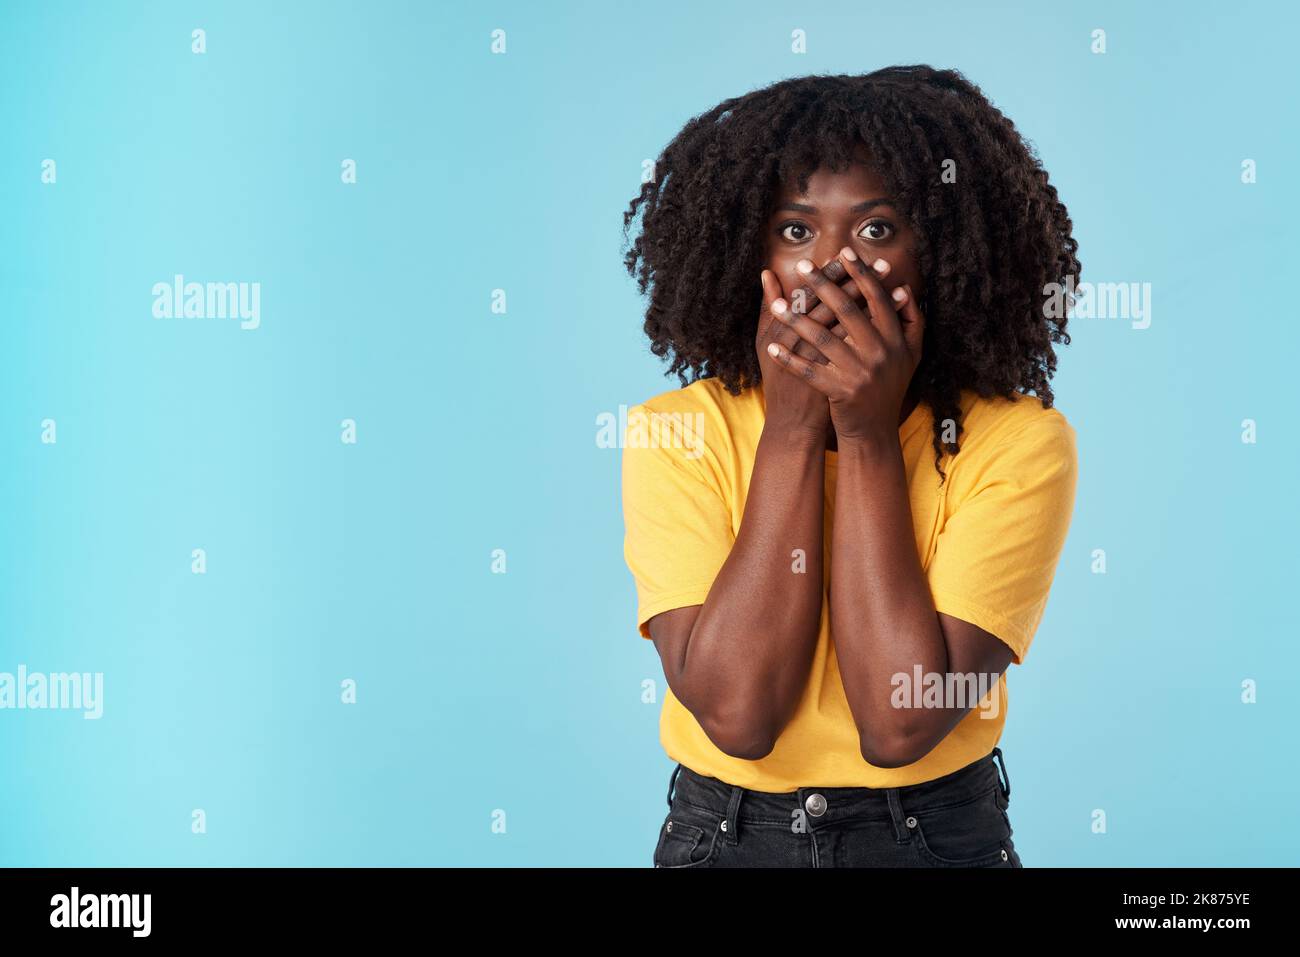 Life just changed in one moment. Studio shot of an attractive young woman looking shocked against a blue background. Stock Photo